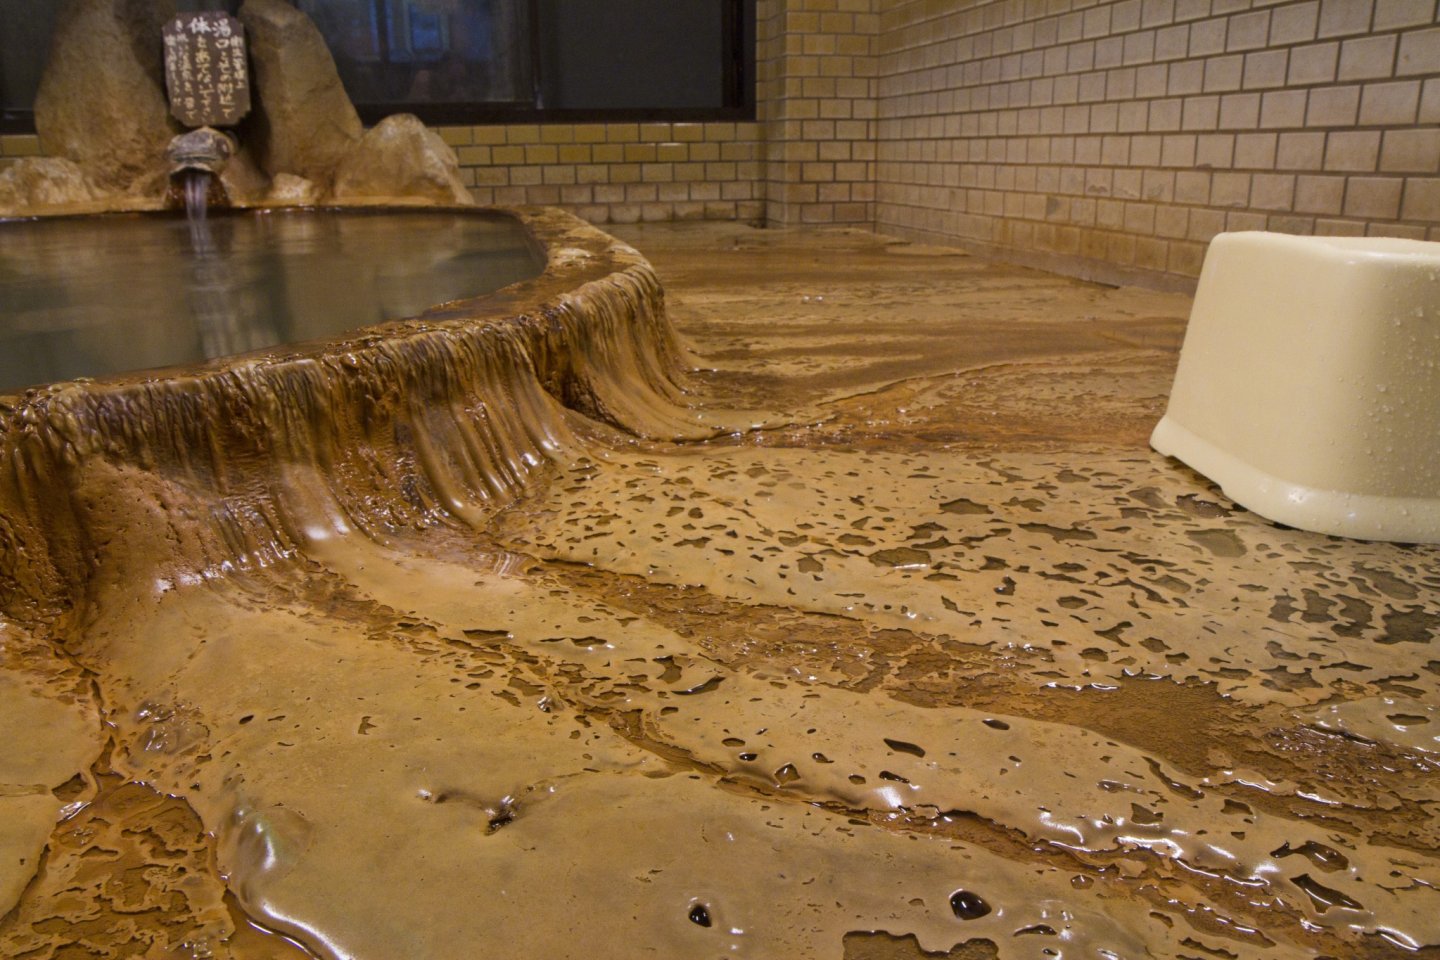 Iron deposits cover the floor after decades of flow of these natural healing waters